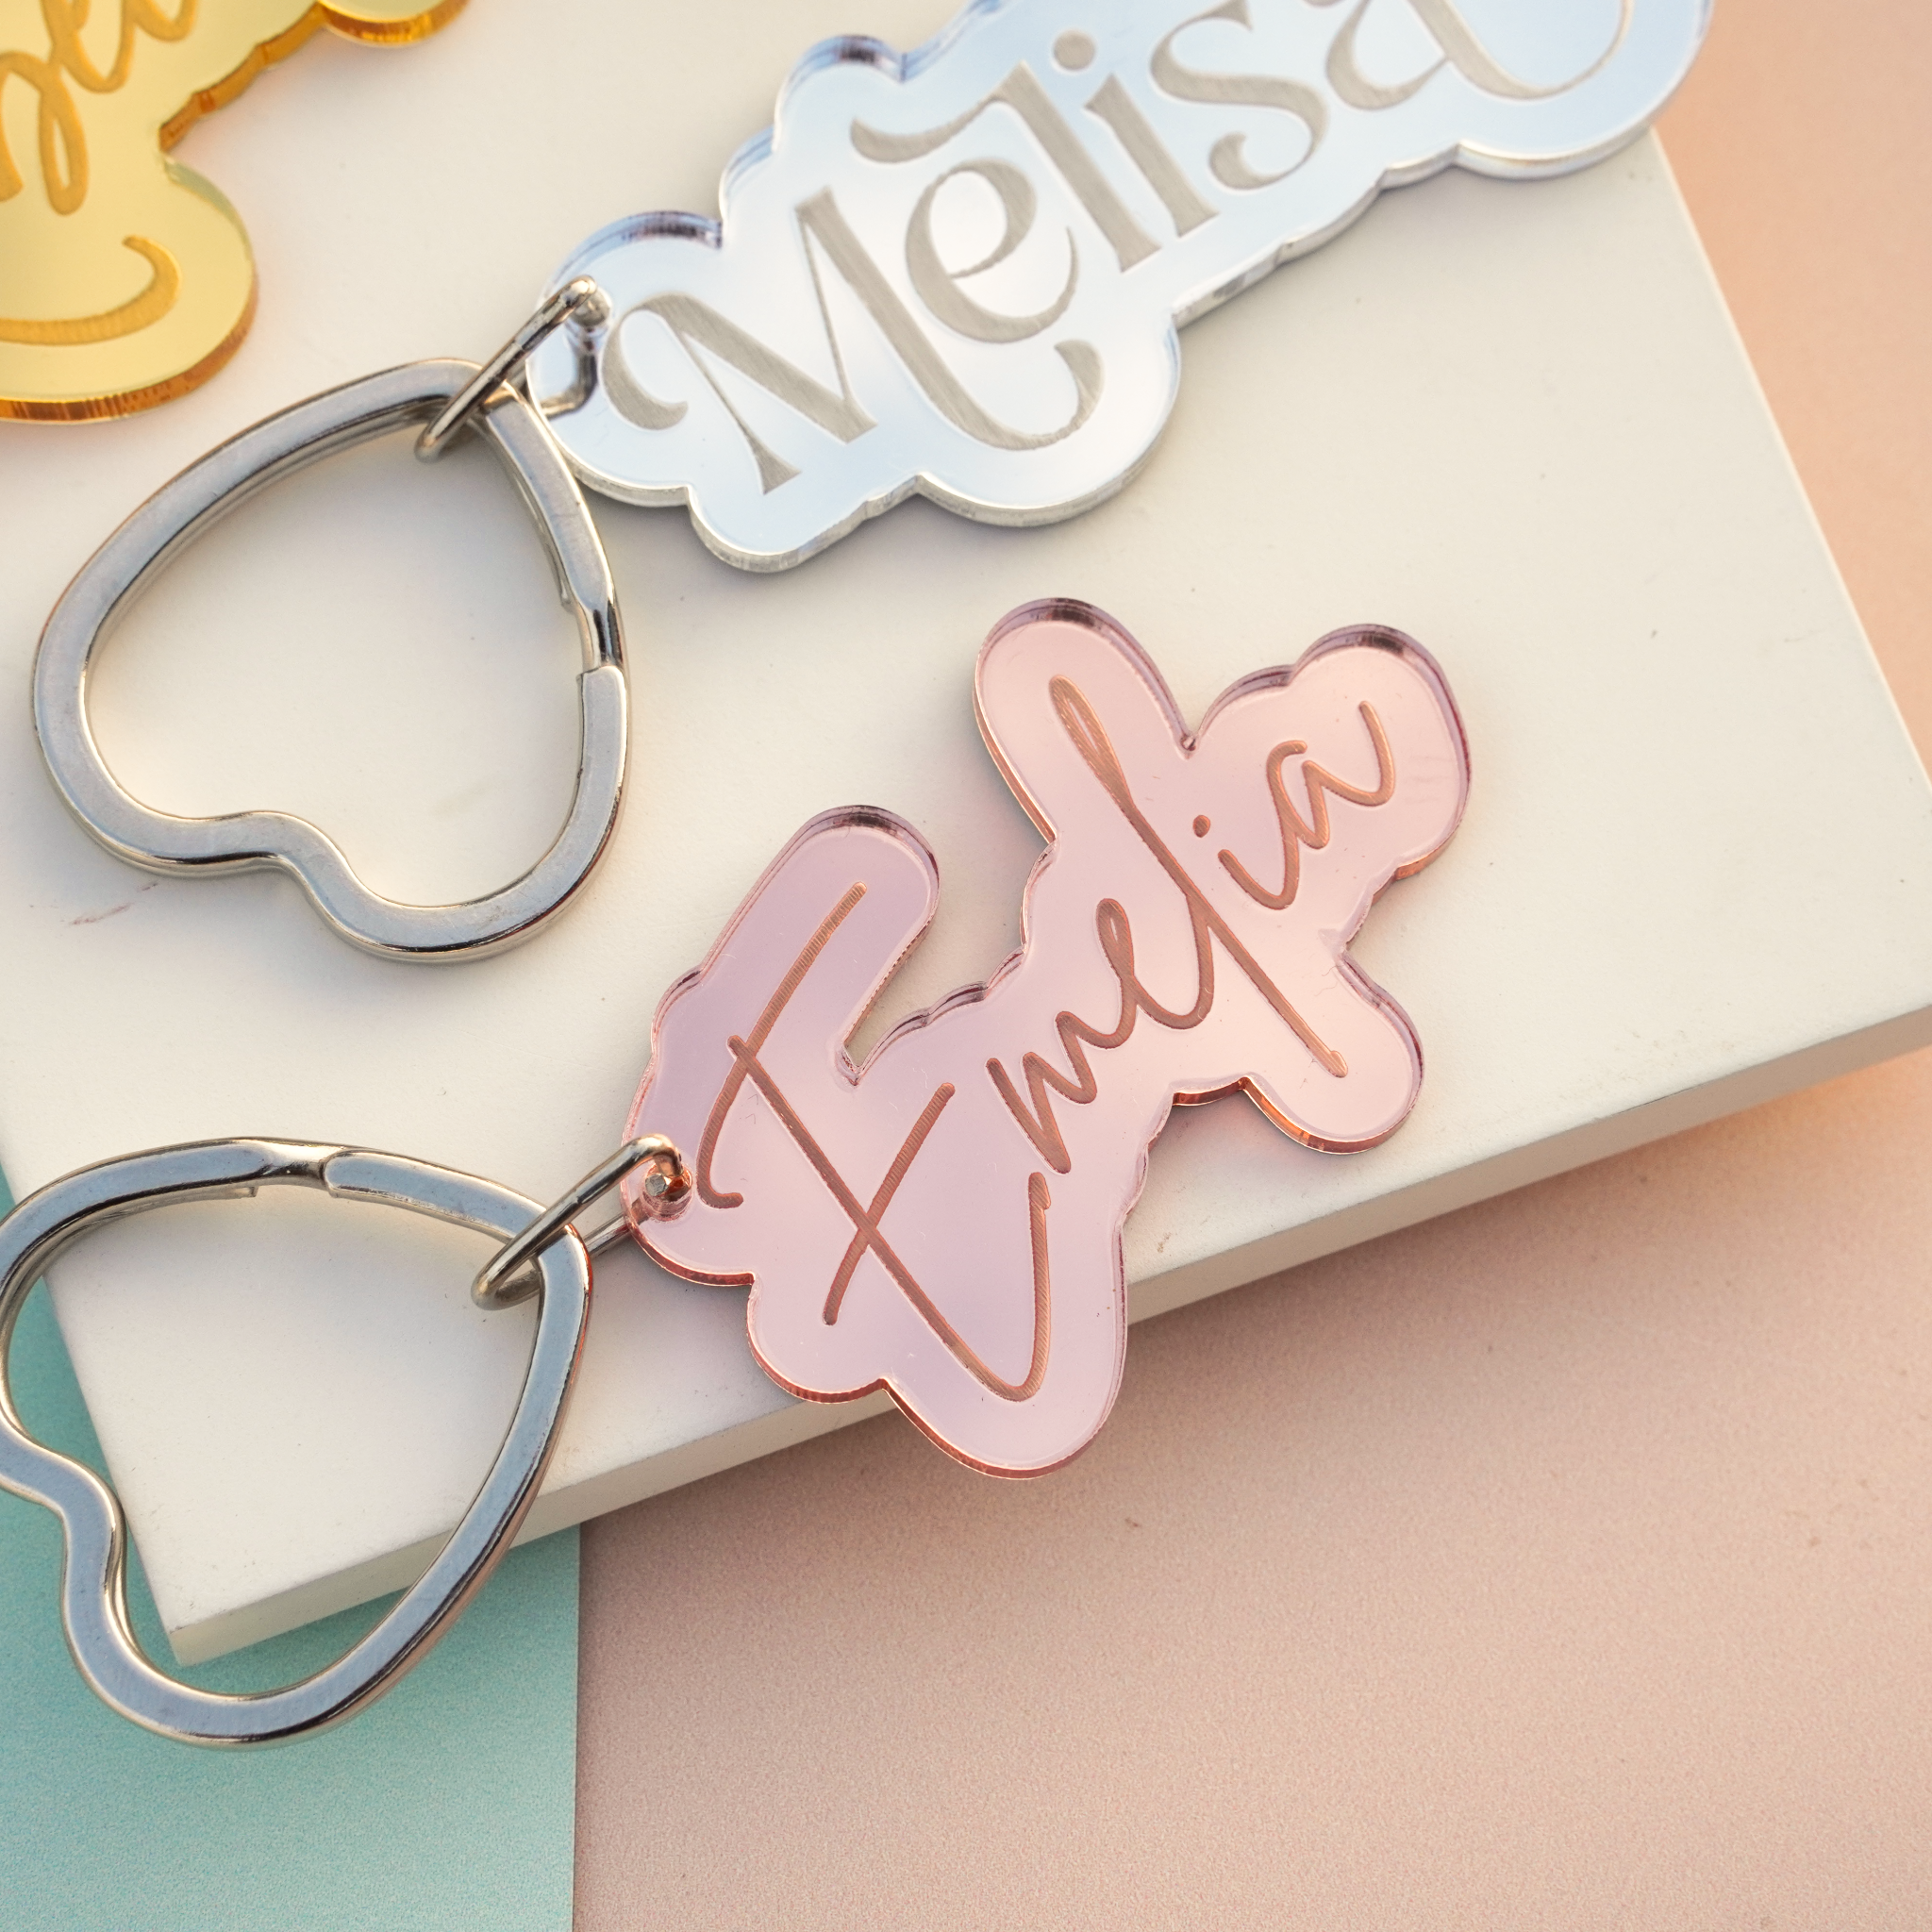 personalised acrylic name key ring for girlfriend or friend 